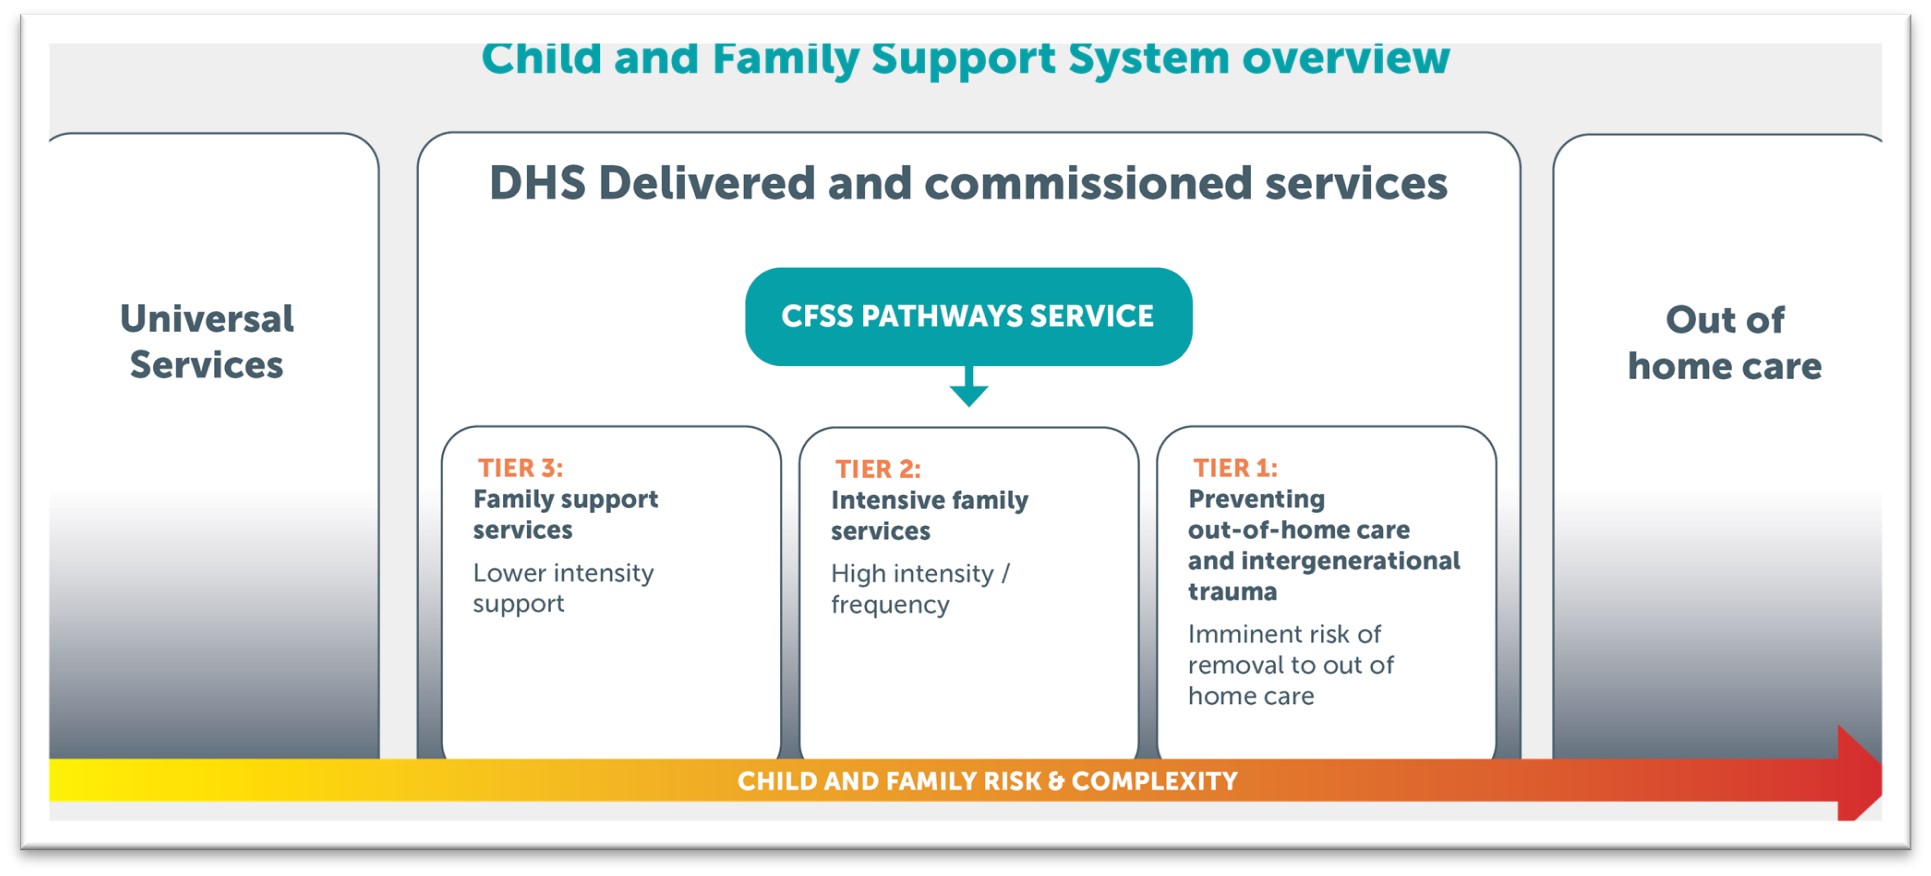 The Child and Family Support System overview diagram. Link to full description below.